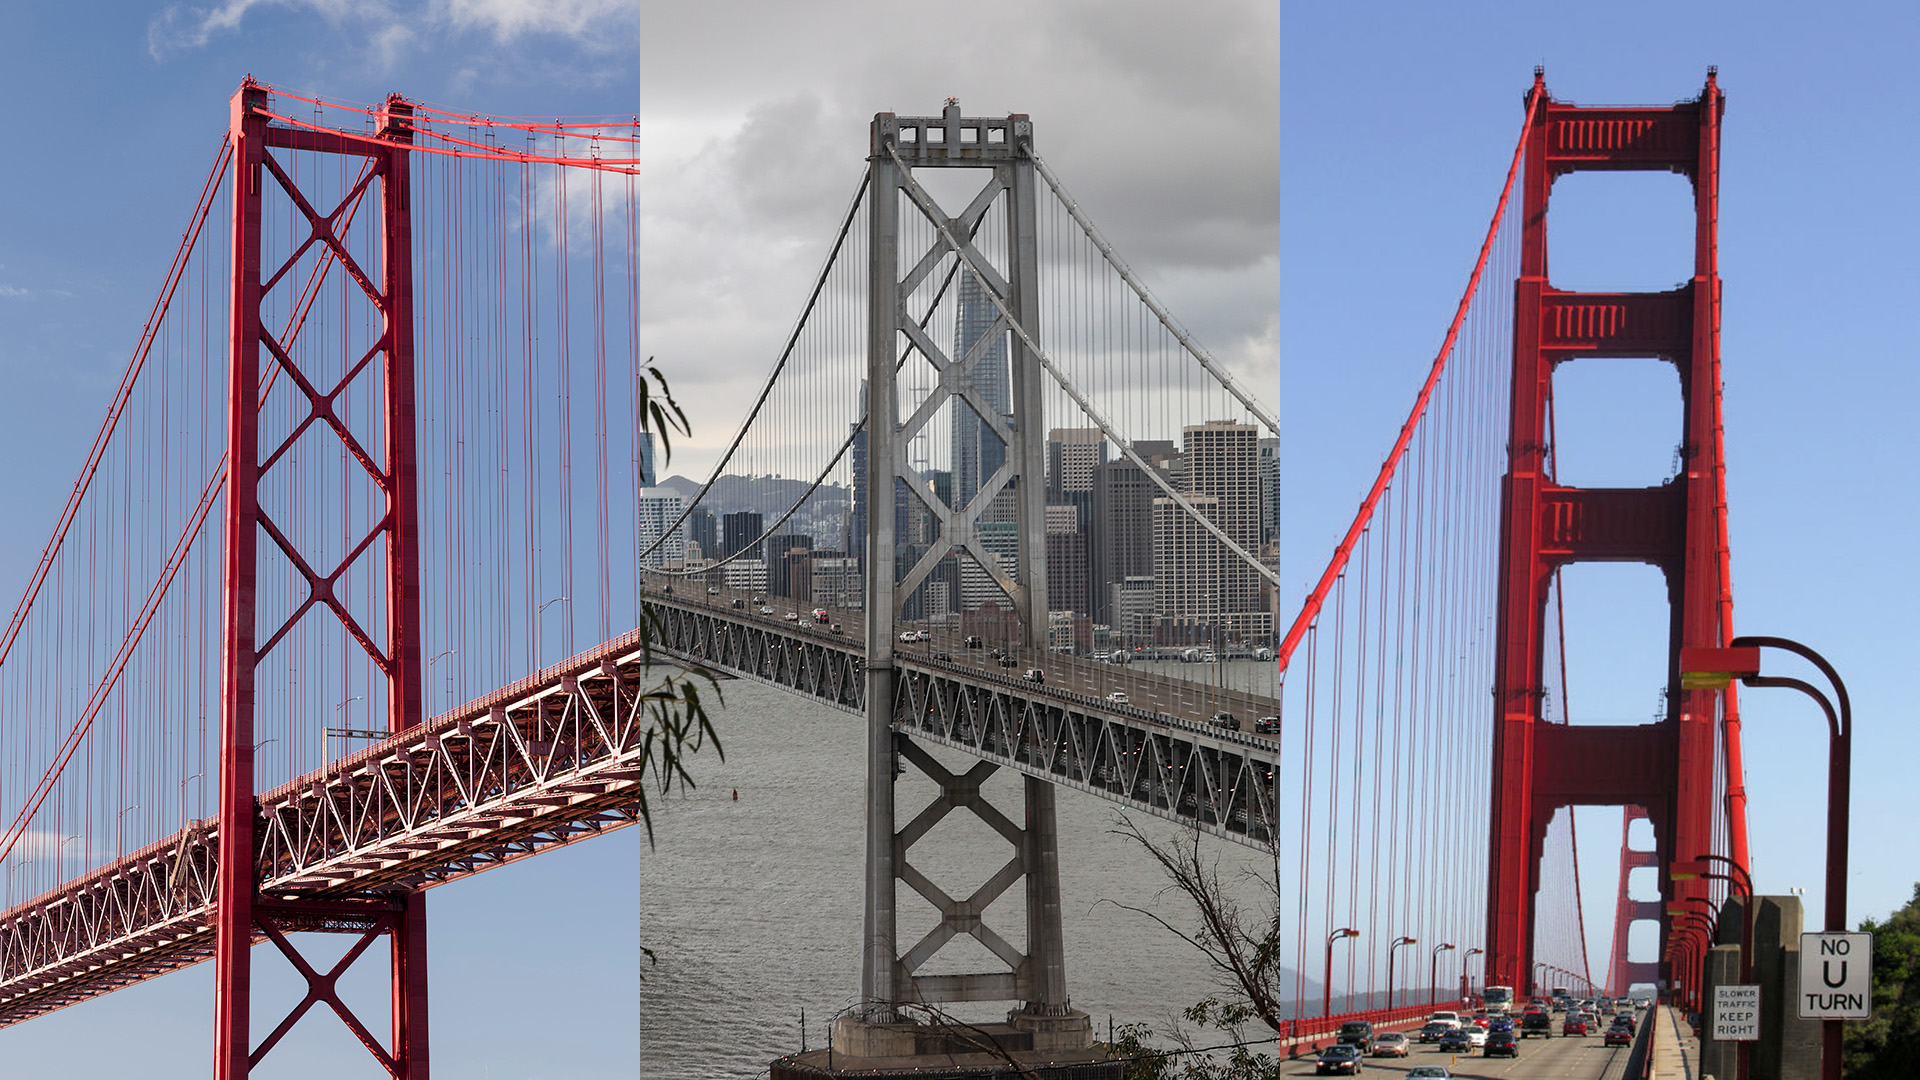 Close up views of the towers of three suspension bridges. The left two bridges have "X" shaped cross supports, while the Golden Gate Bridge, on the right, has square supports.